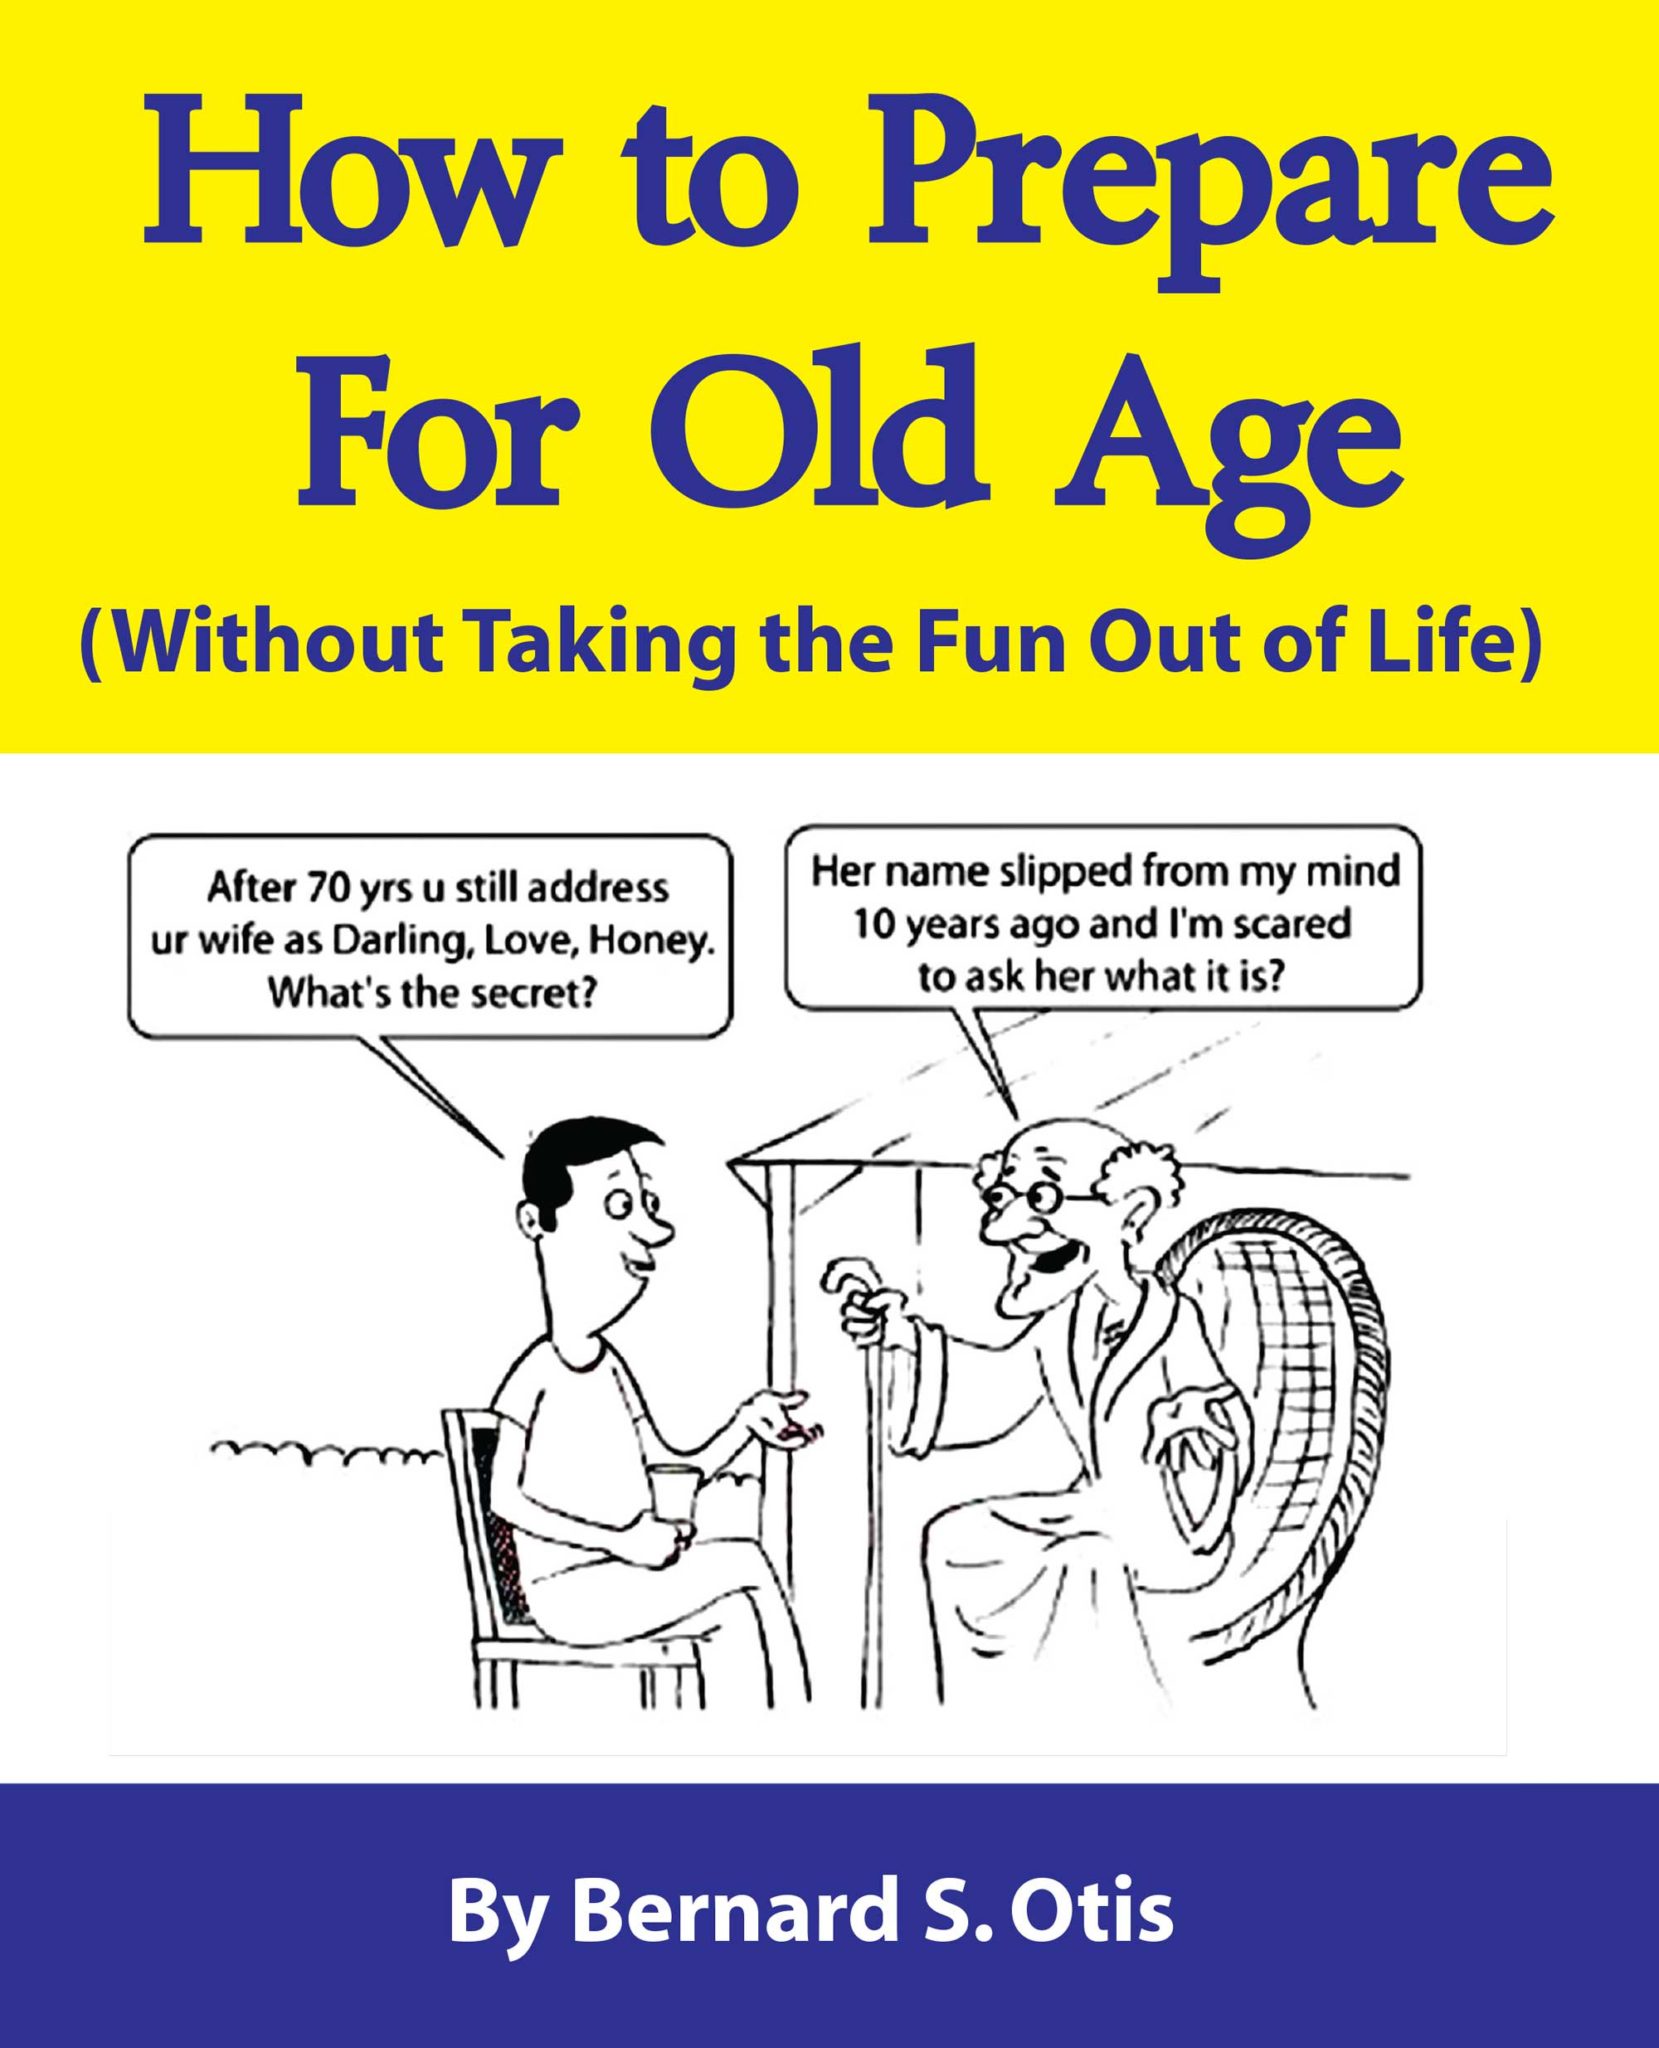 How To Prepare For Old Age: Without Taking the Fun Out of Life by Bernard Otis